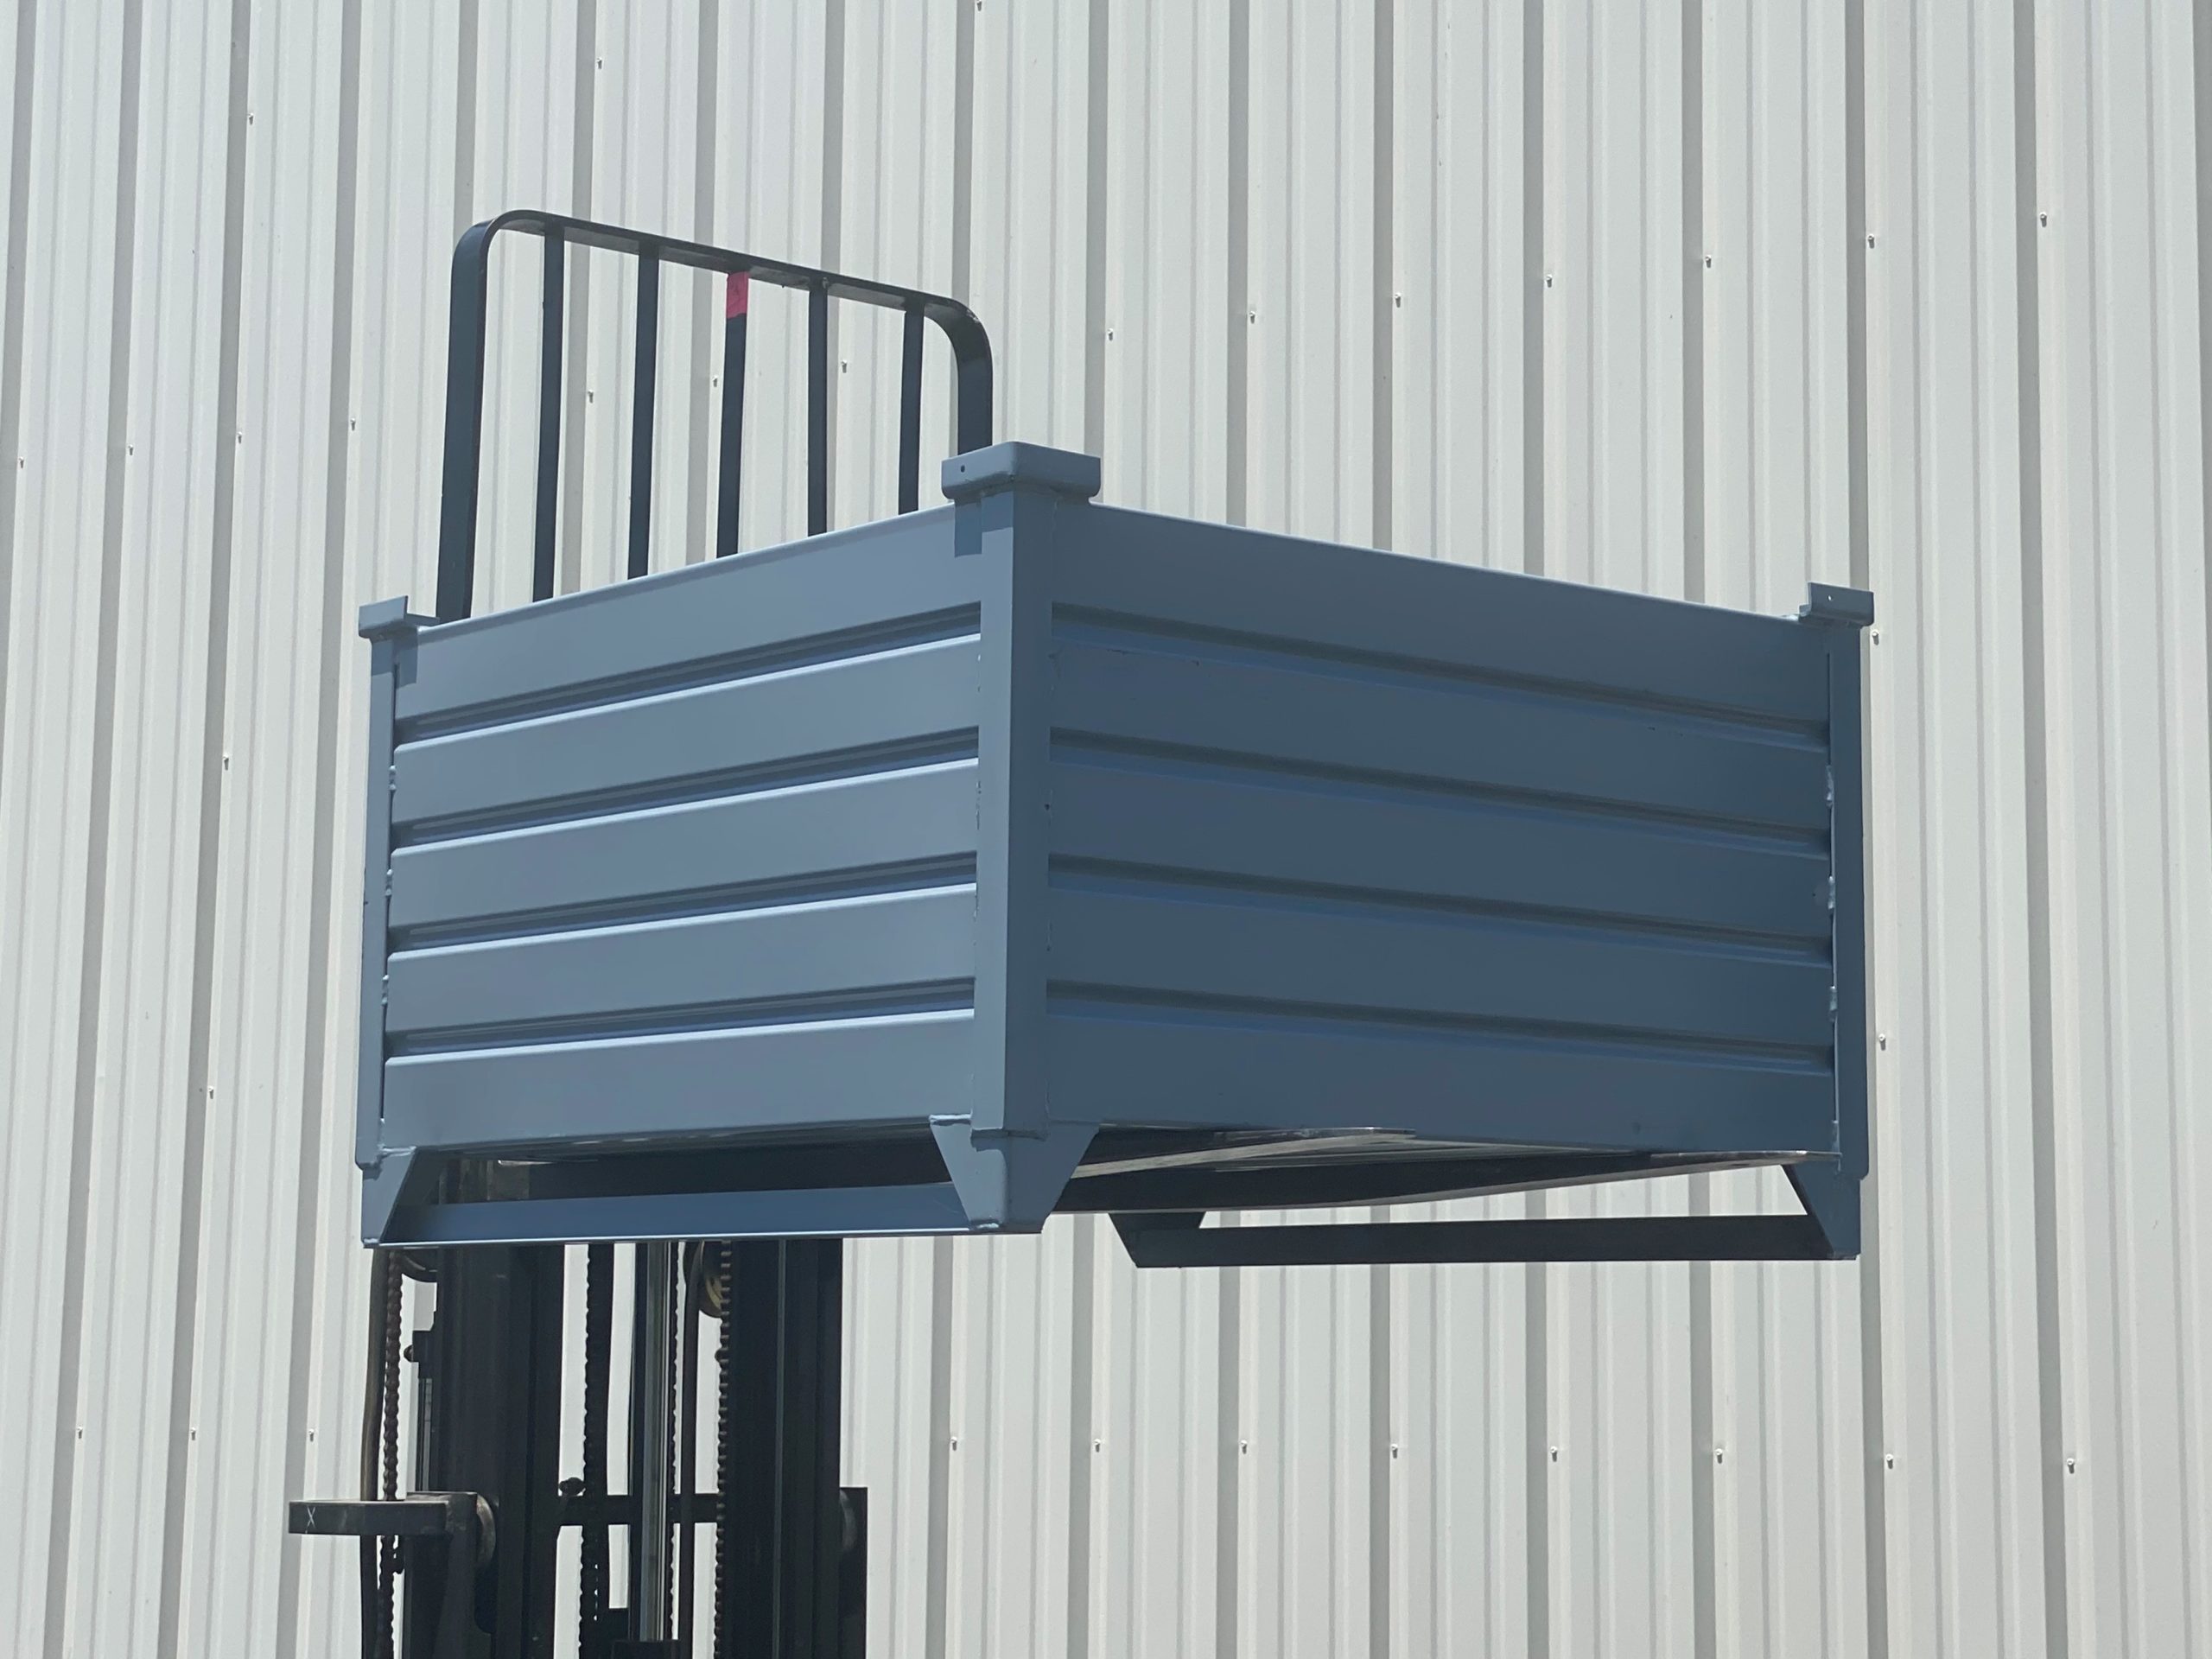 https://rackandshelf.com/wp-content/uploads/Corrugated-Steel-Container-with-Runners-Lifted-1-scaled.jpg